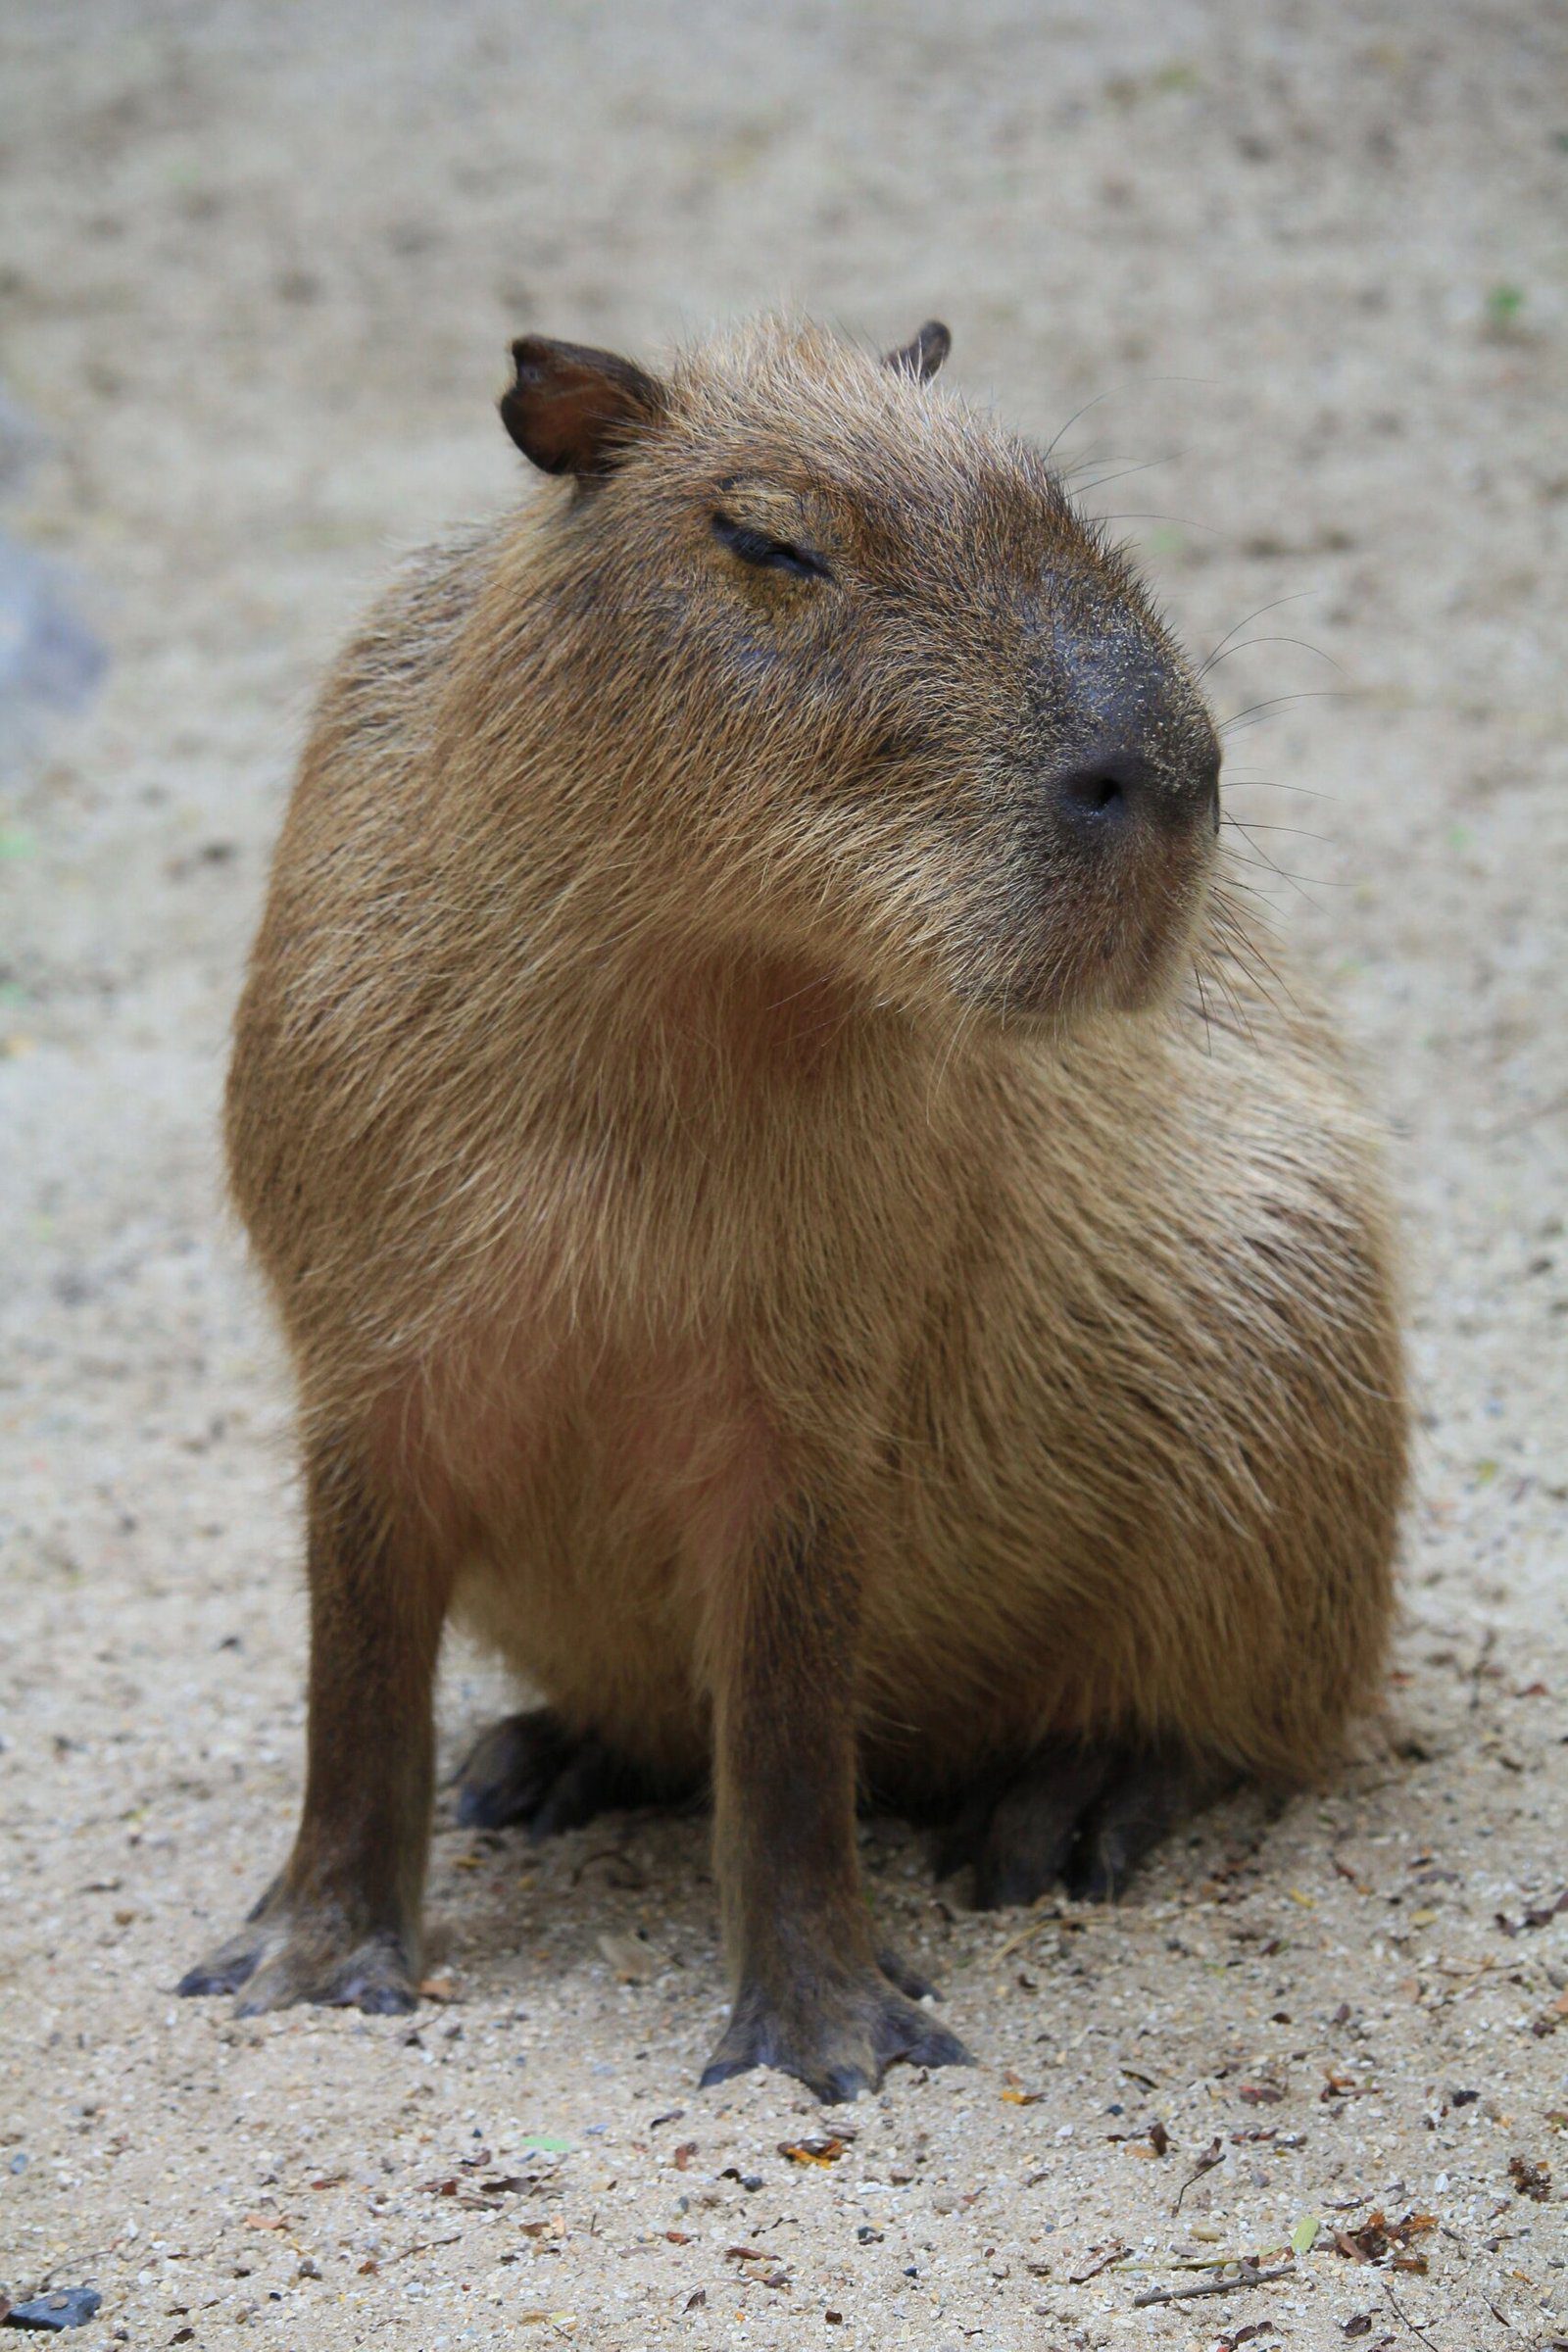 Is it legal to keep a capybara as a pet in the United States?